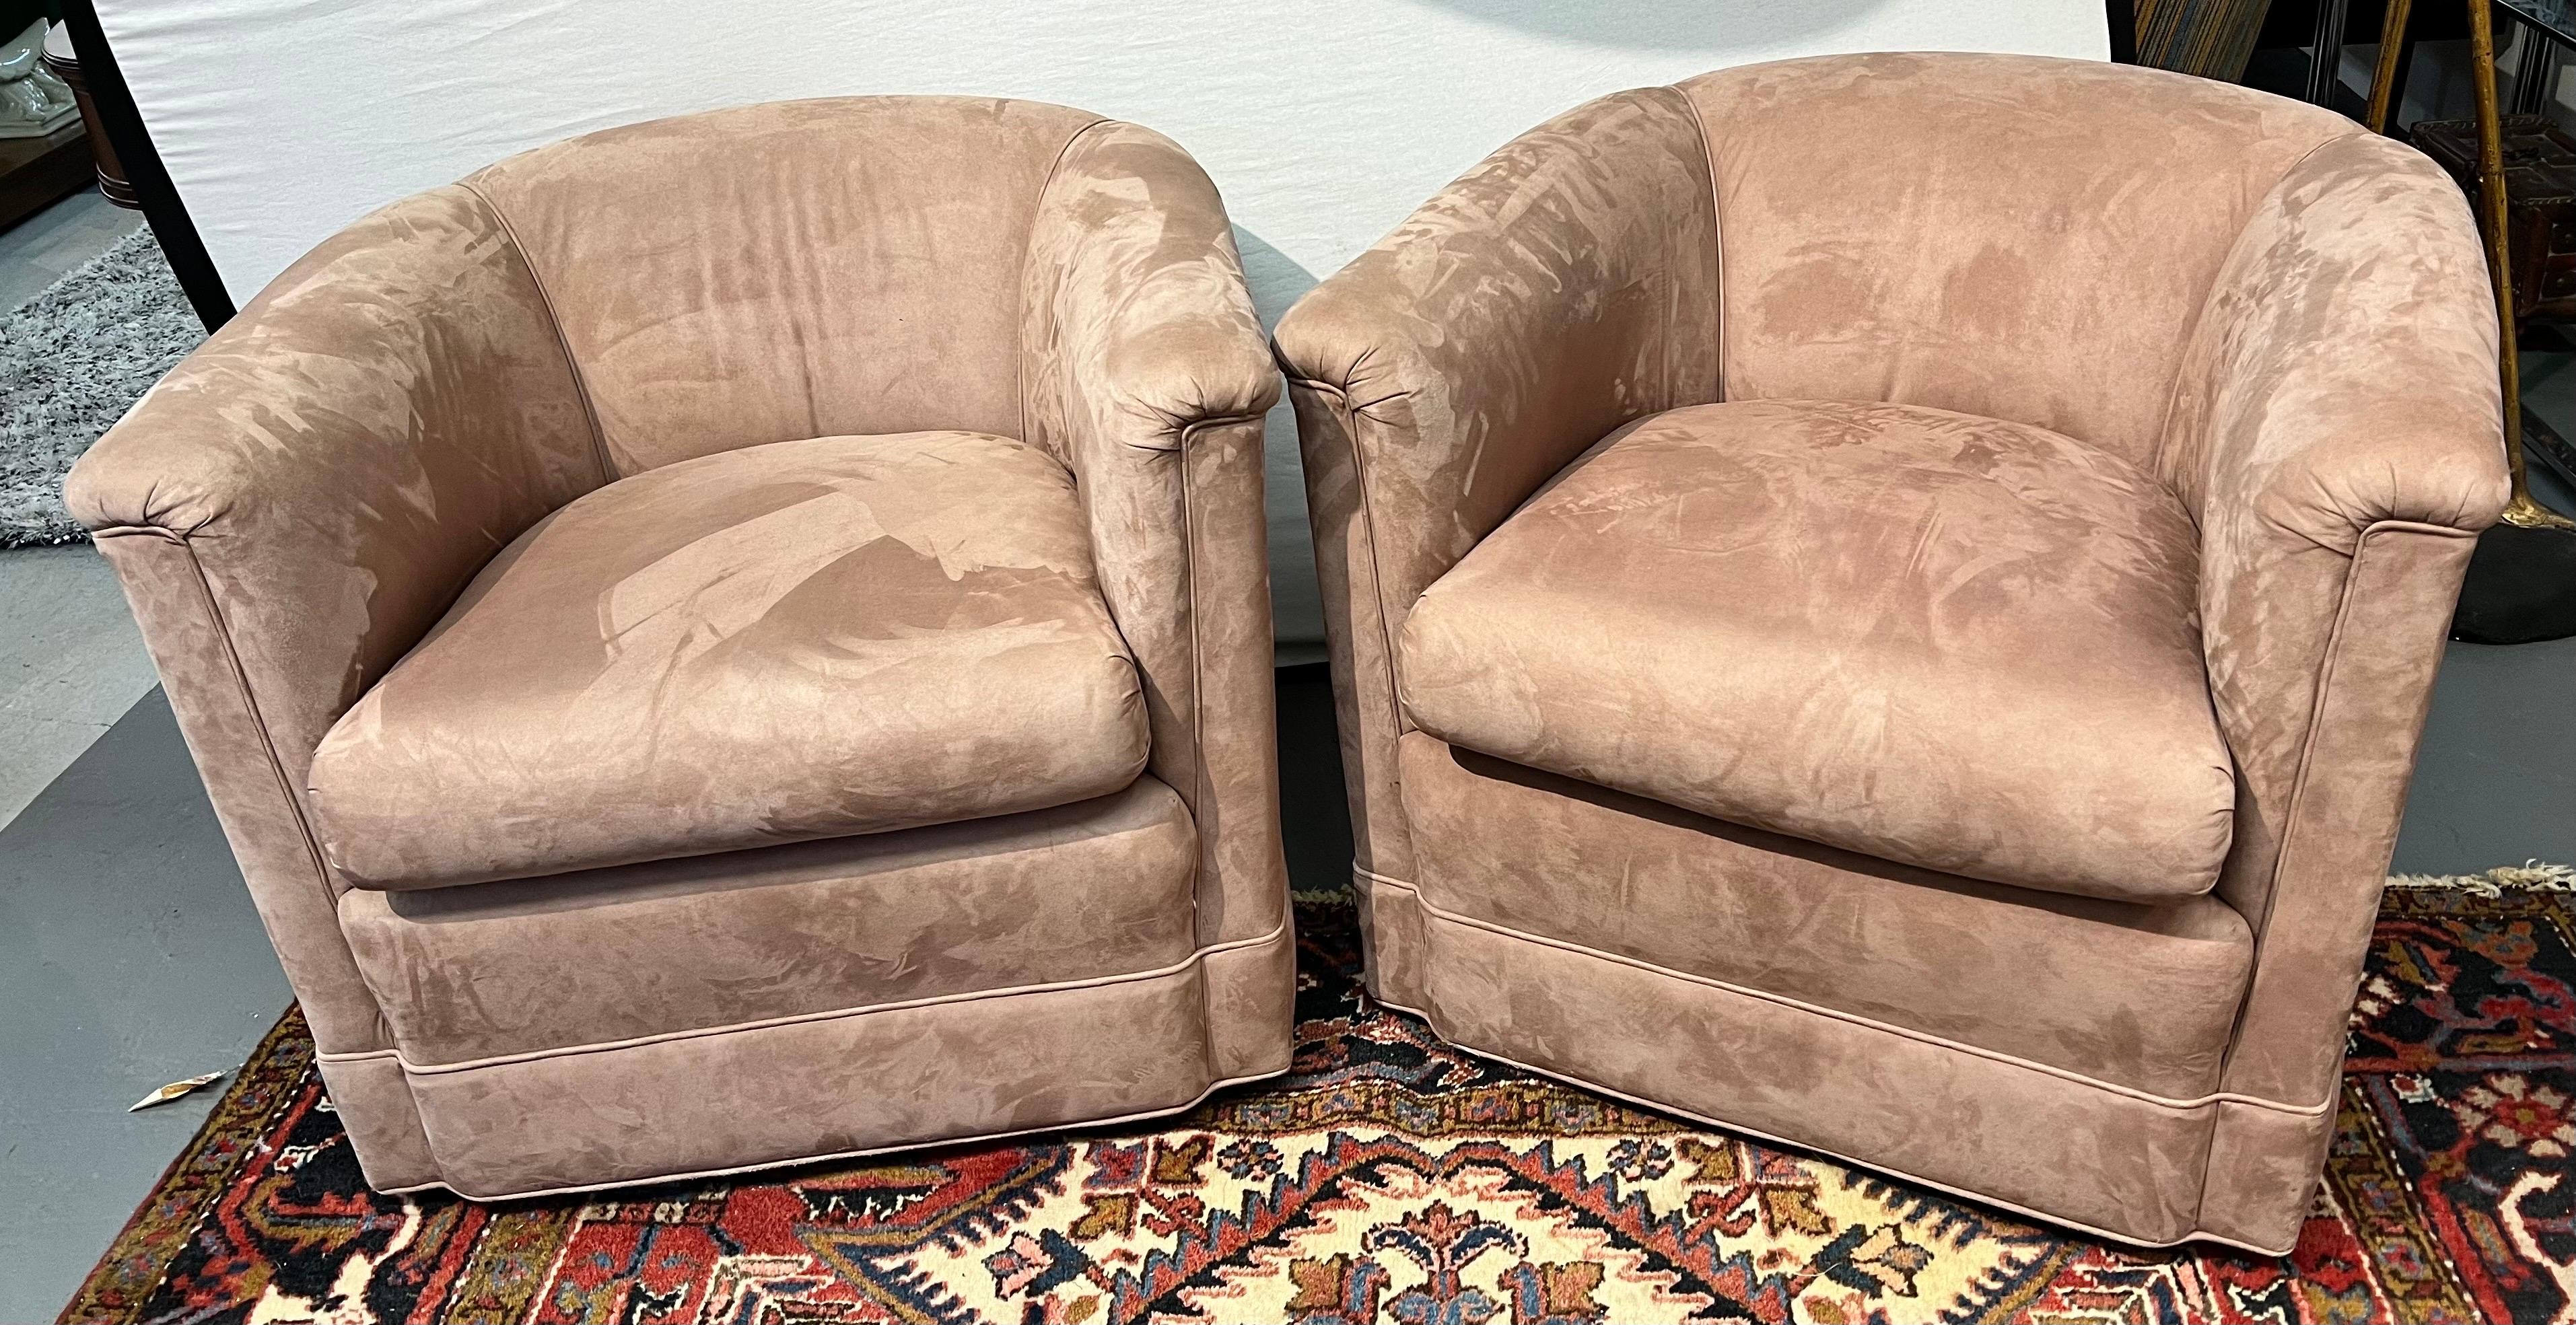 Sleek pair of newly upholstered barrel chairs from the 1970's.
The new fabric is a blush colored micro suede which is neutral
and will compliment many design aesthetics. They sit beautifully and are
ready for their new home. Why not own the best?